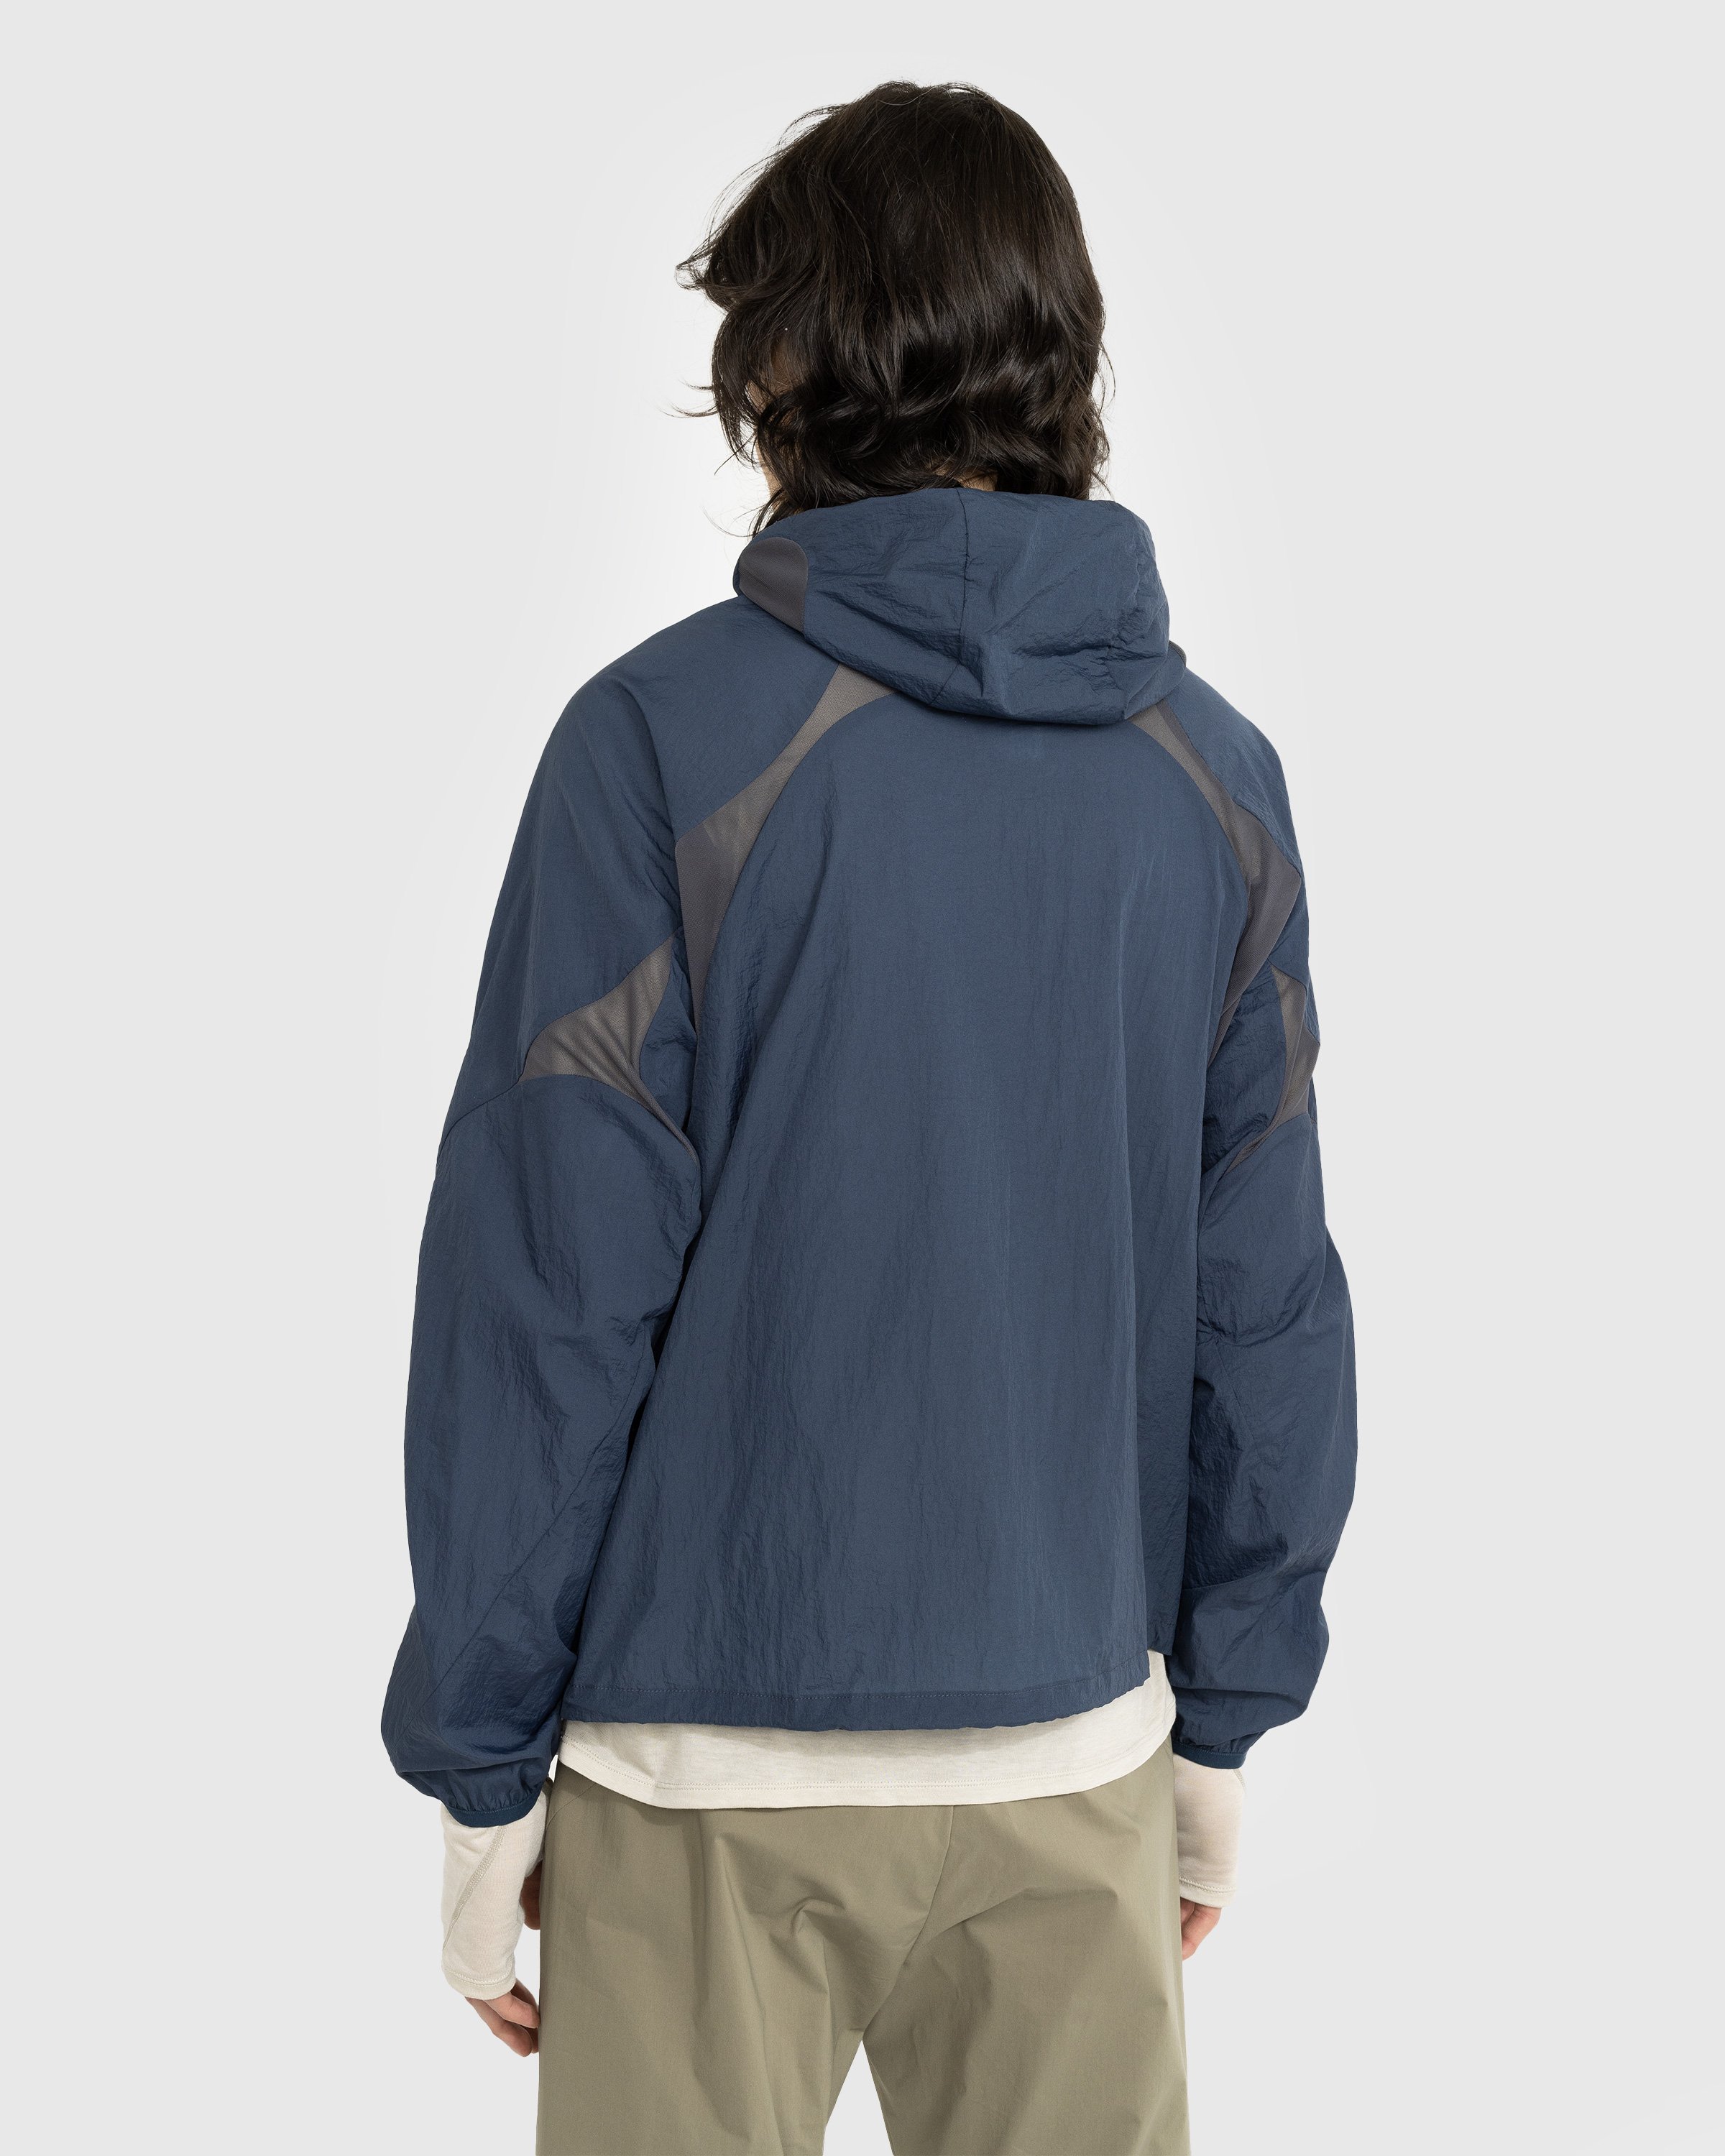 Post Archive Faction (PAF) - 5.0+ Technical Jacket Right Navy - Clothing - Blue - Image 3